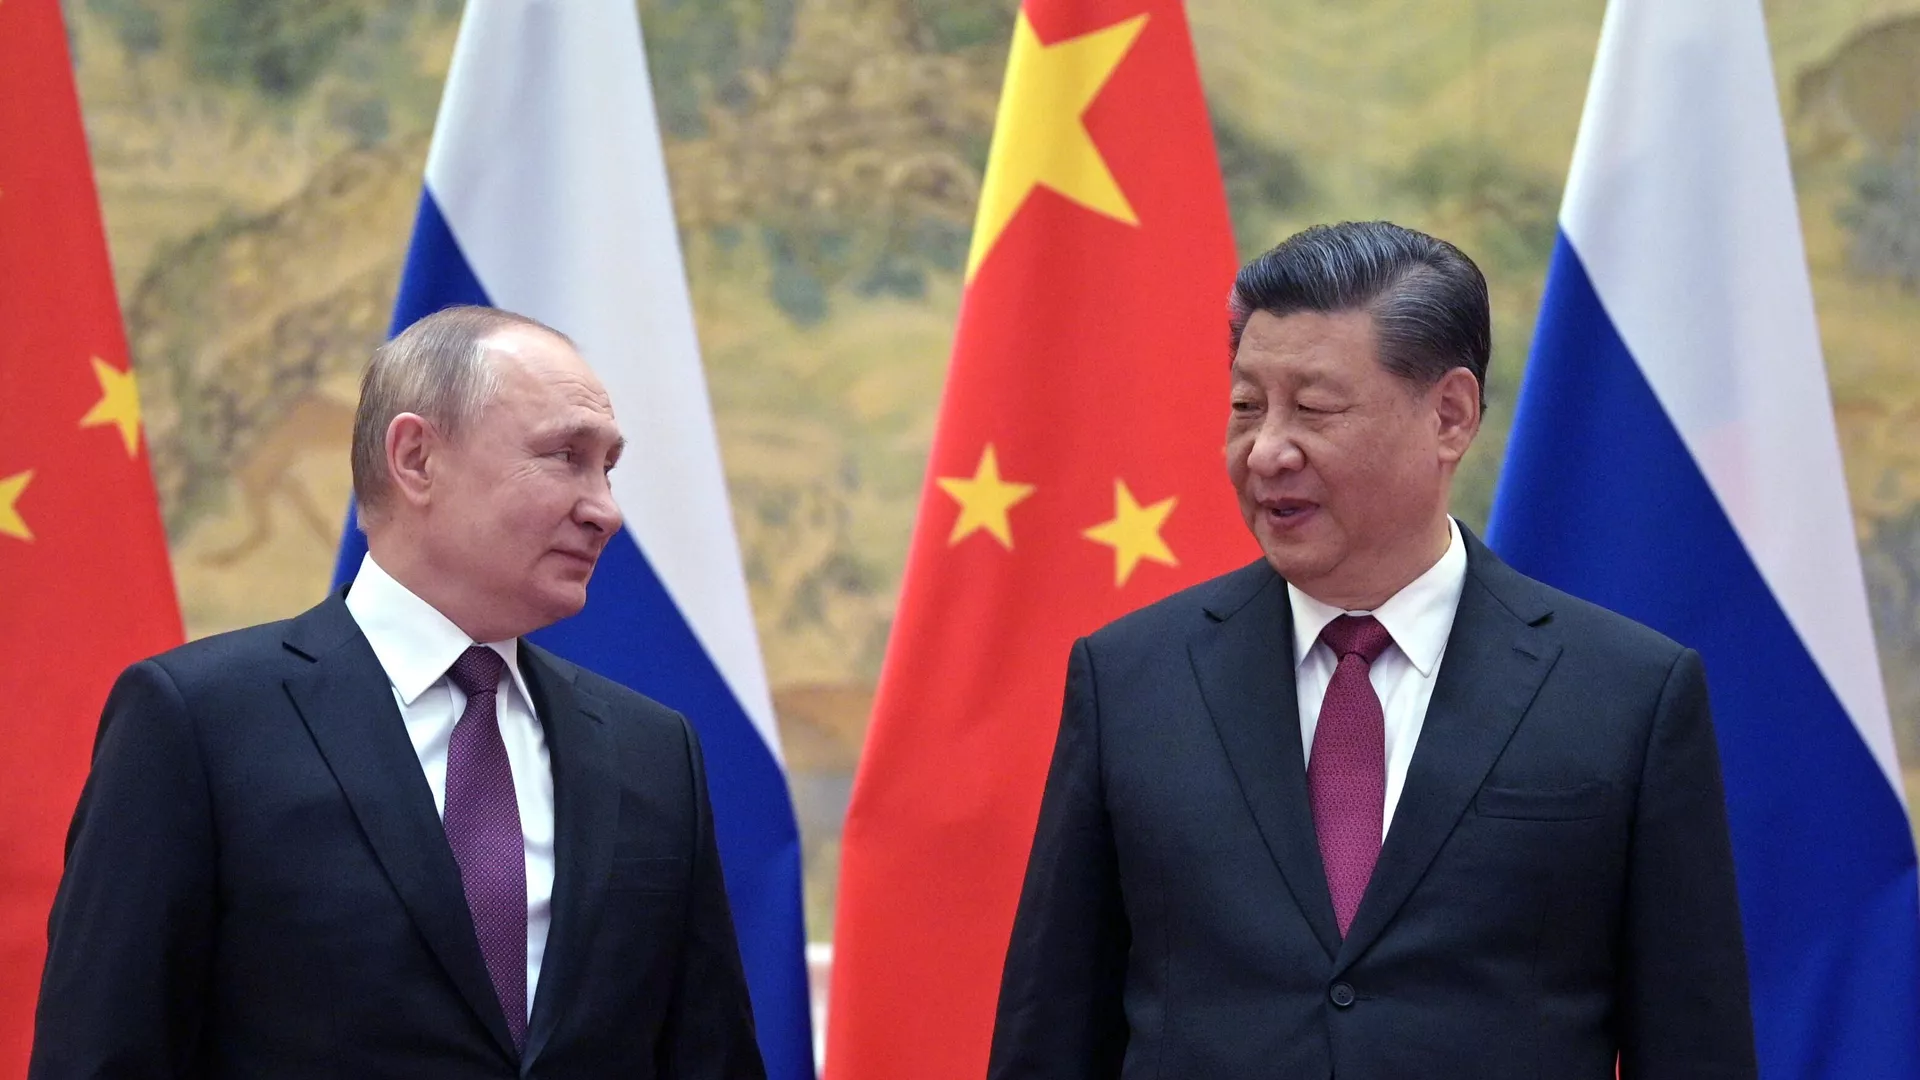 Xi Jinping’s ‘Landmark’ Visit to Moscow Shows US Plan to Isolate Russia ‘Backfired Spectacularly’